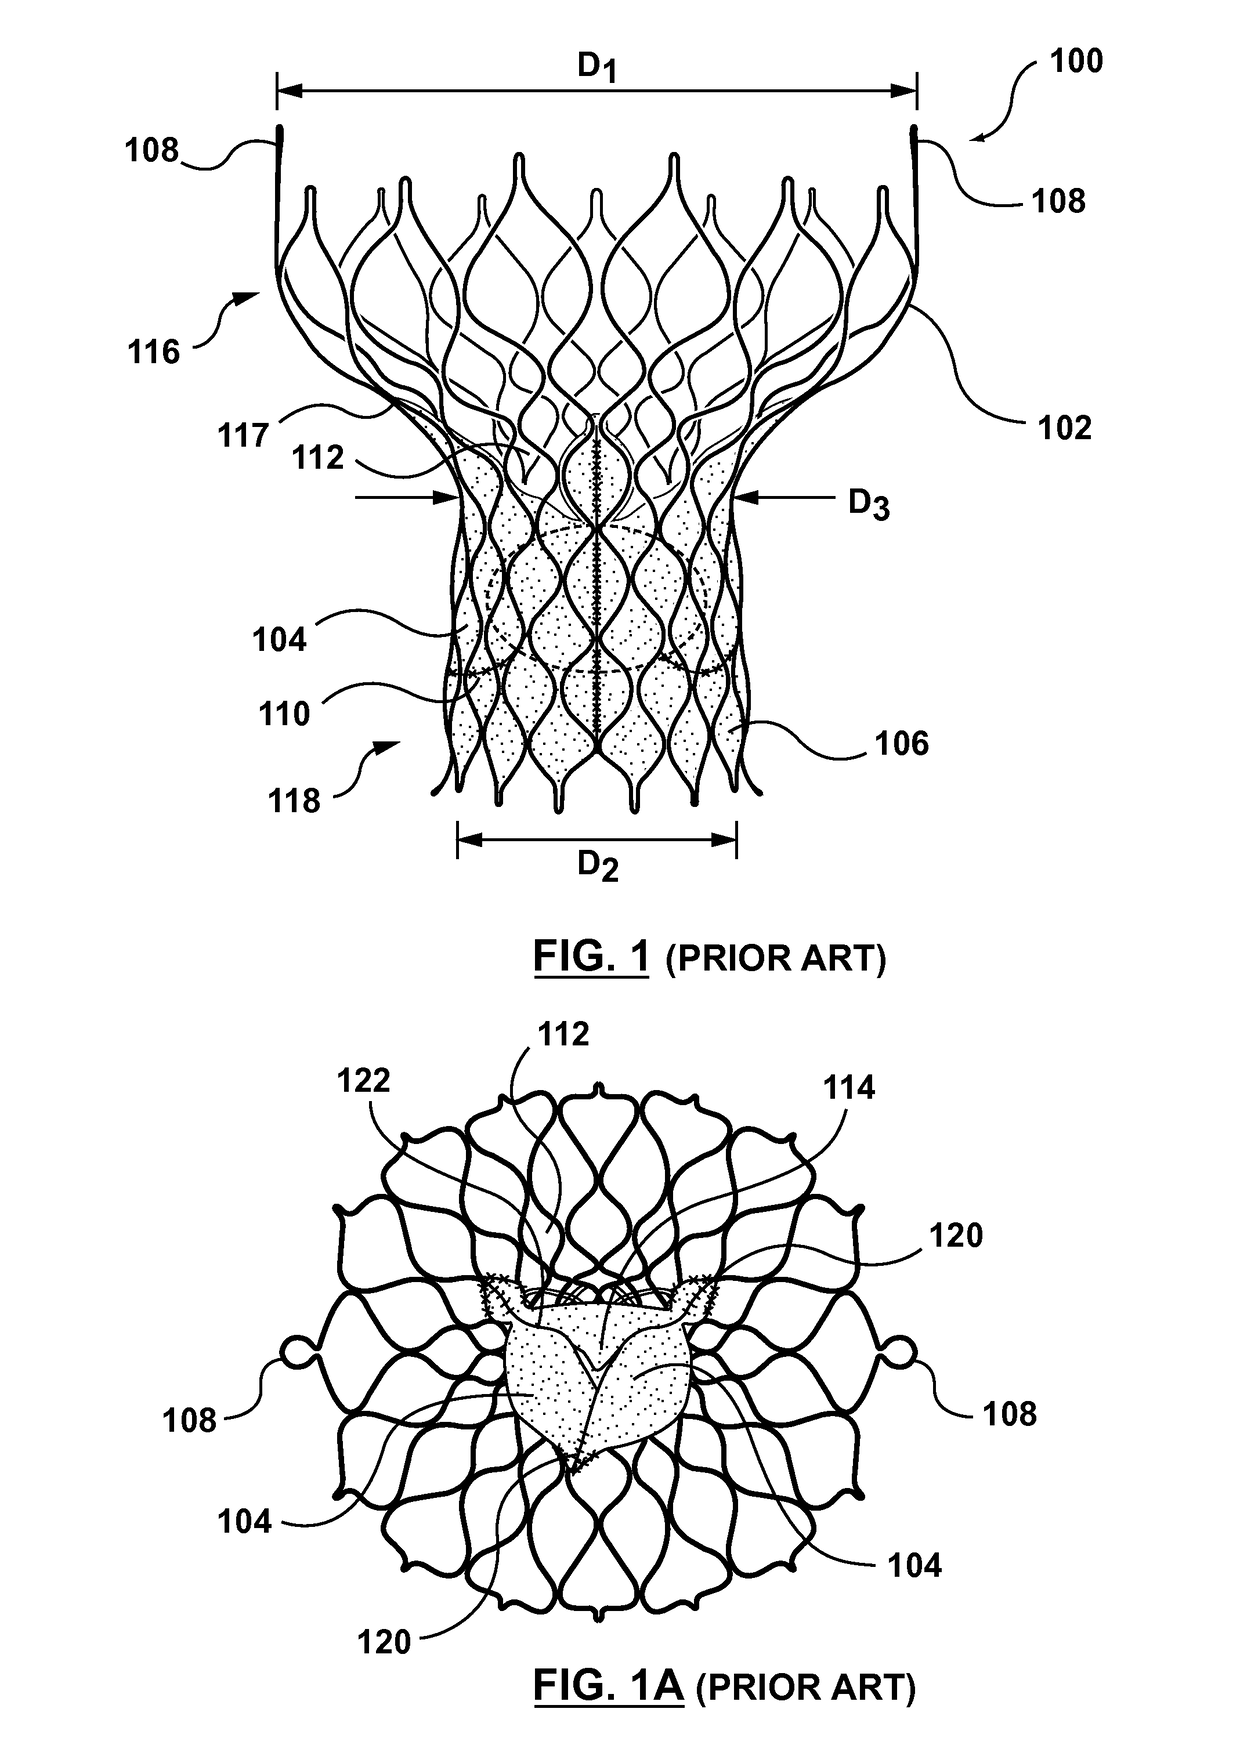 Filtered sealing components for a transcatheter valve prosthesis